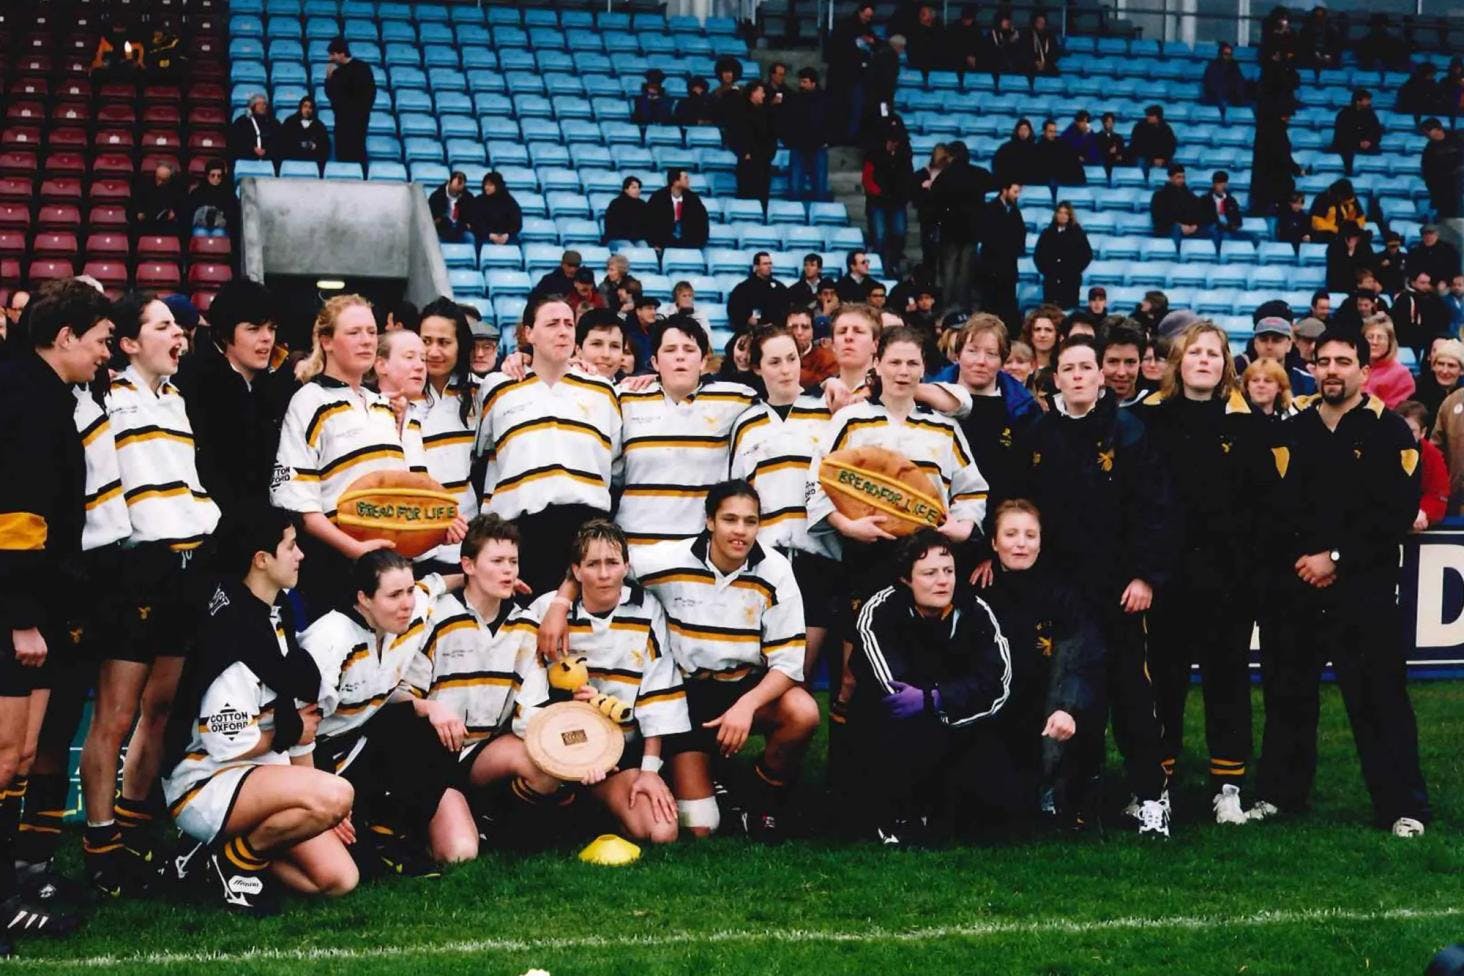 Wasps Women's Rugby 1996 Bread for Life Cup Final